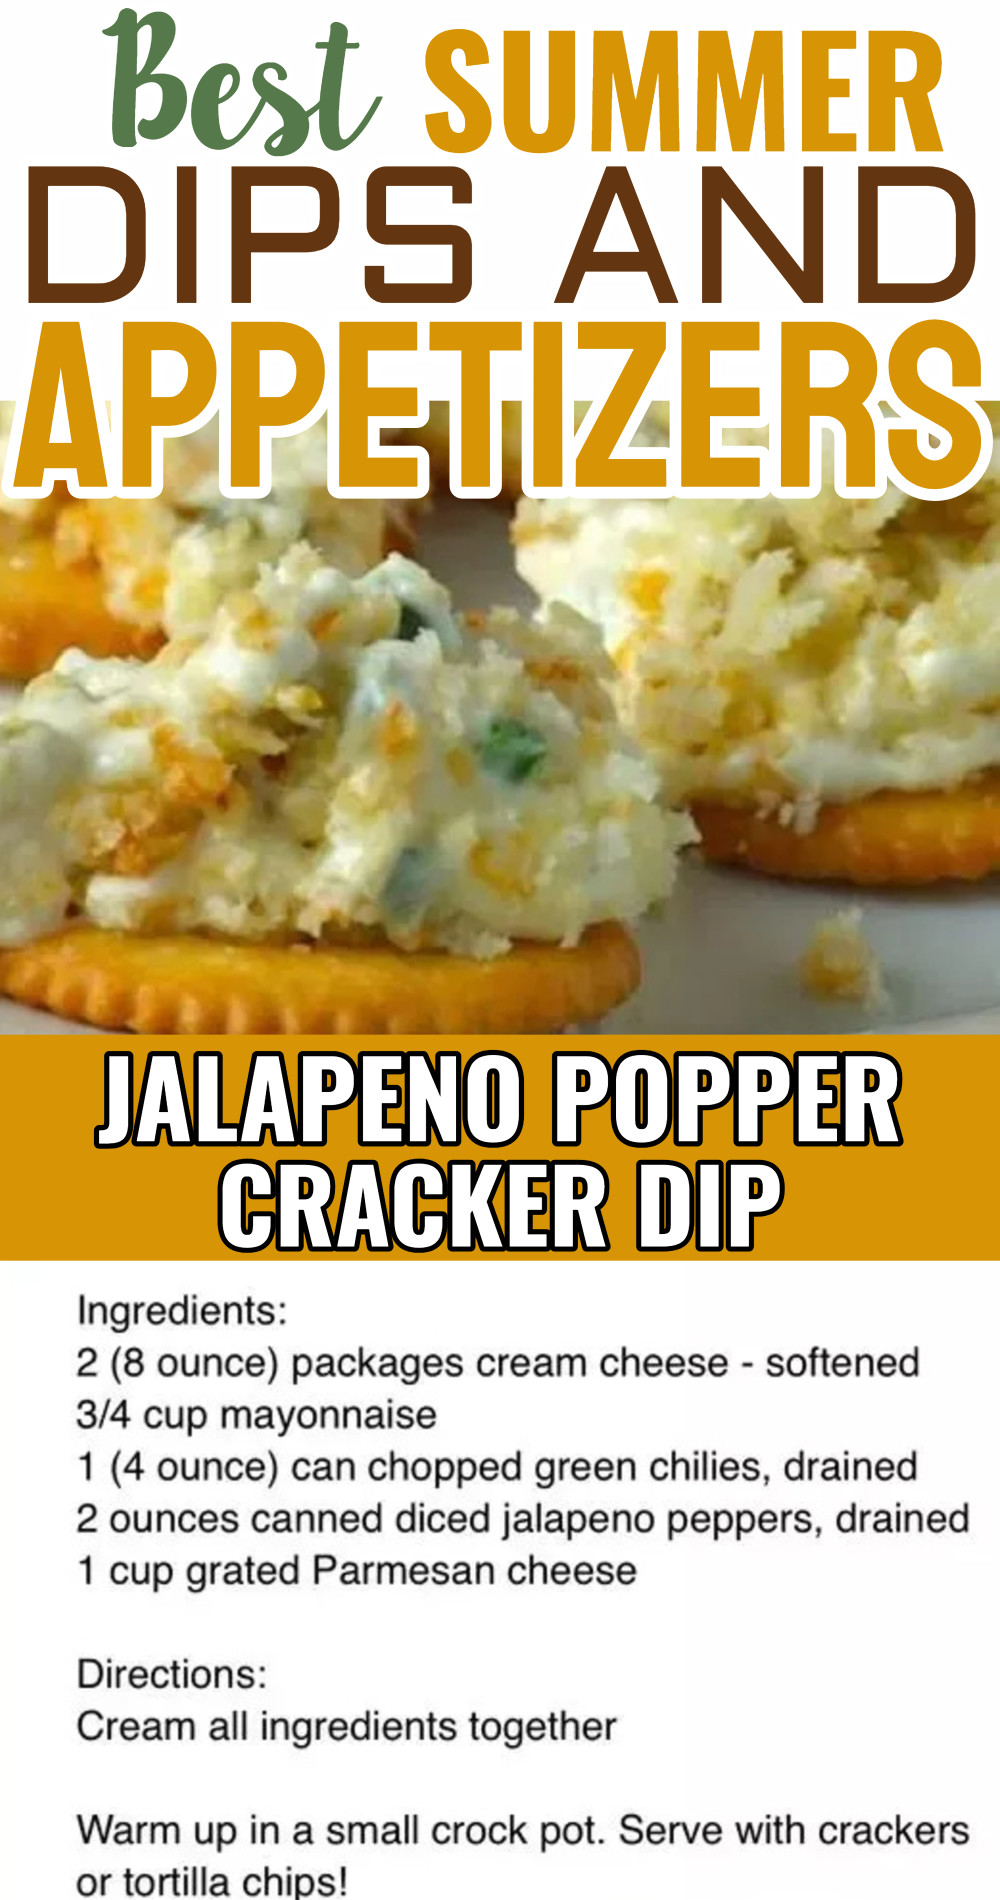 Best summer dips and appetizers jalapeno popper cracker dip recipe